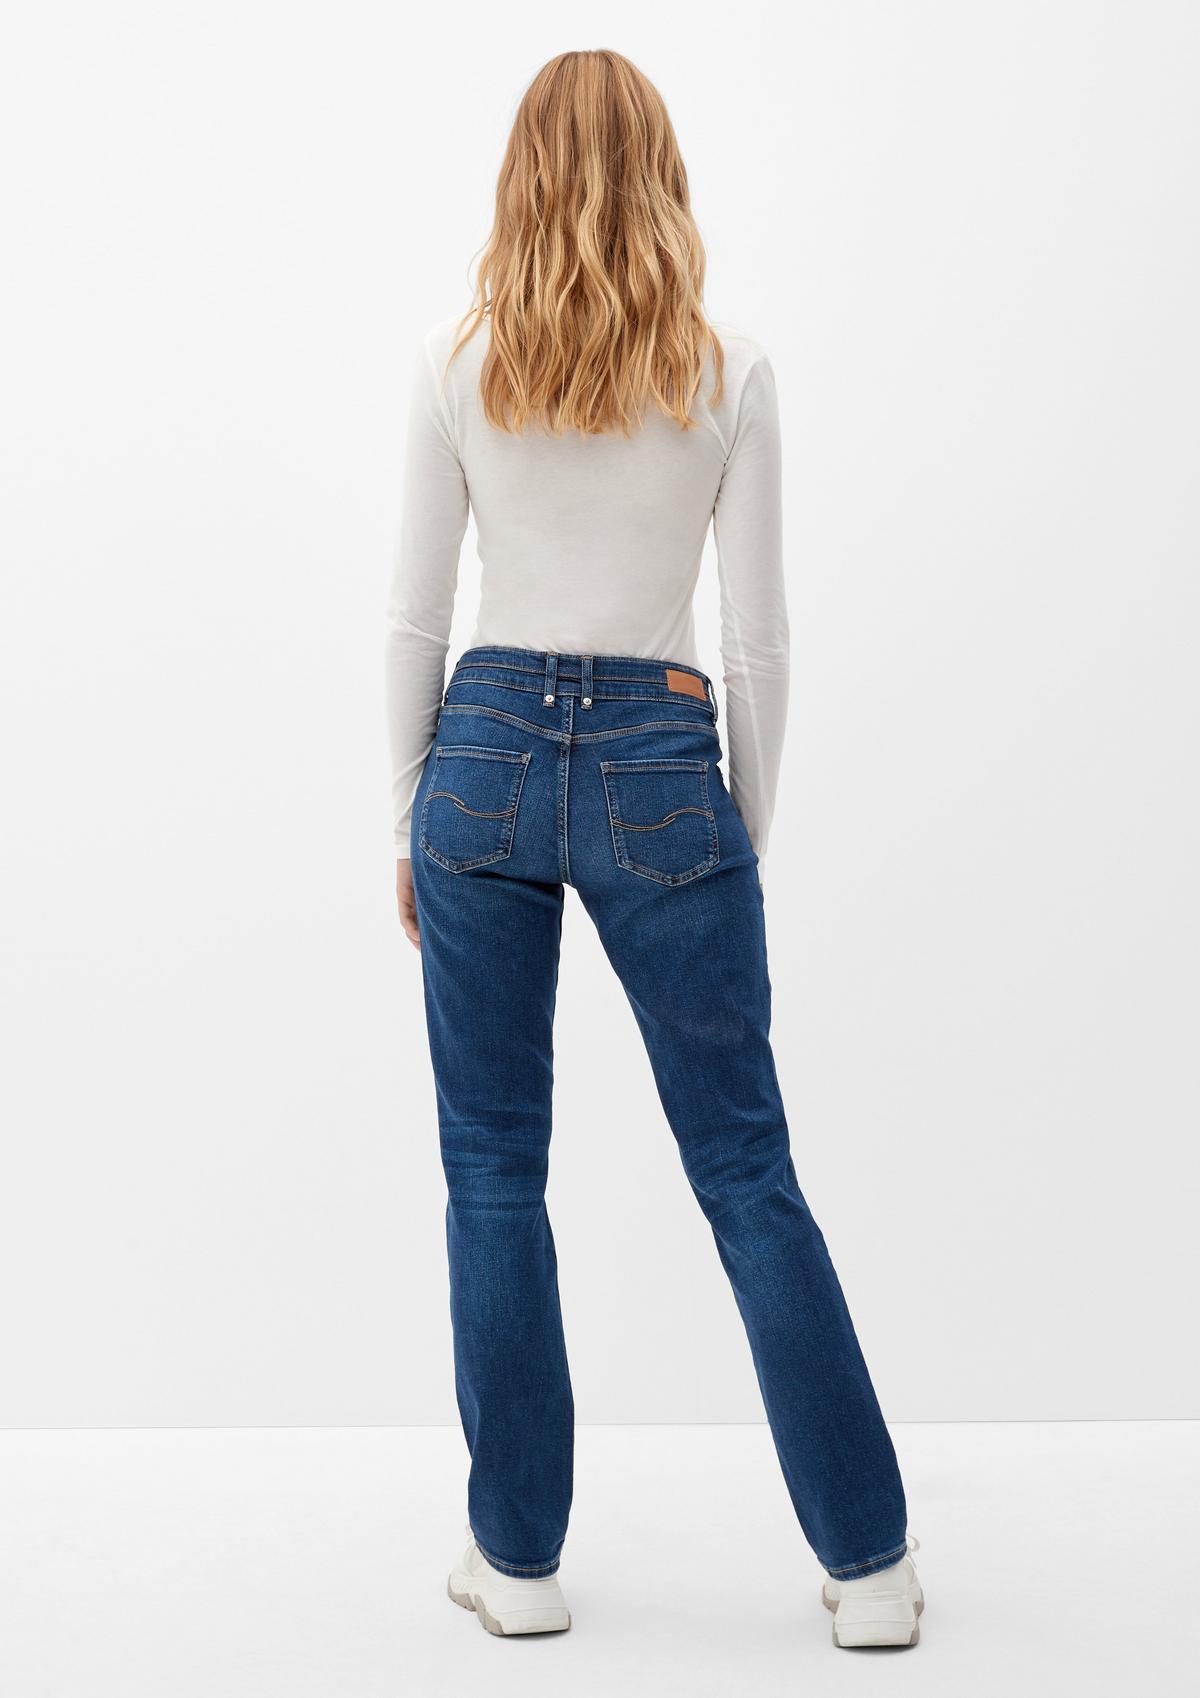 s.Oliver Jeans Catie / Slim Fit / Mid Rise / Straight Leg